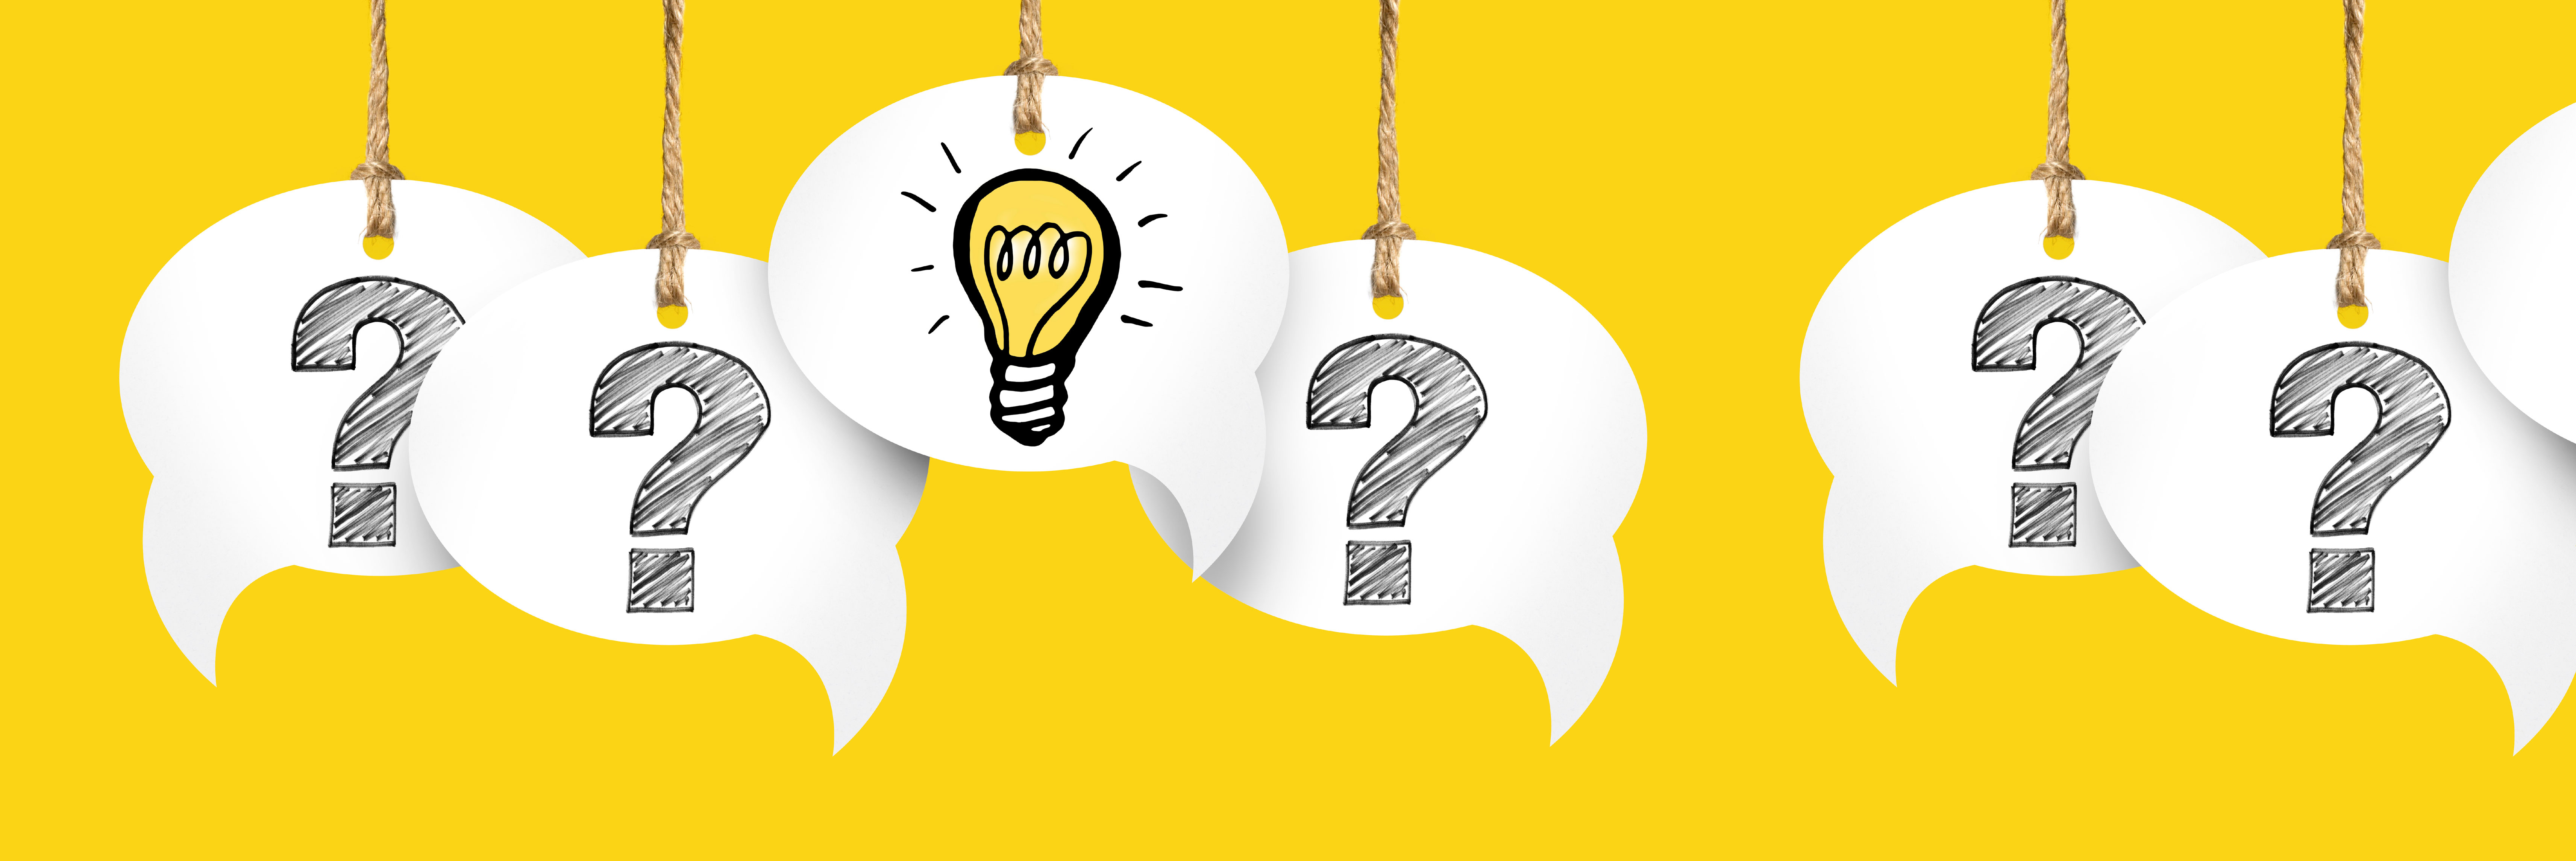 background: question mark in speech bubble against yellow background